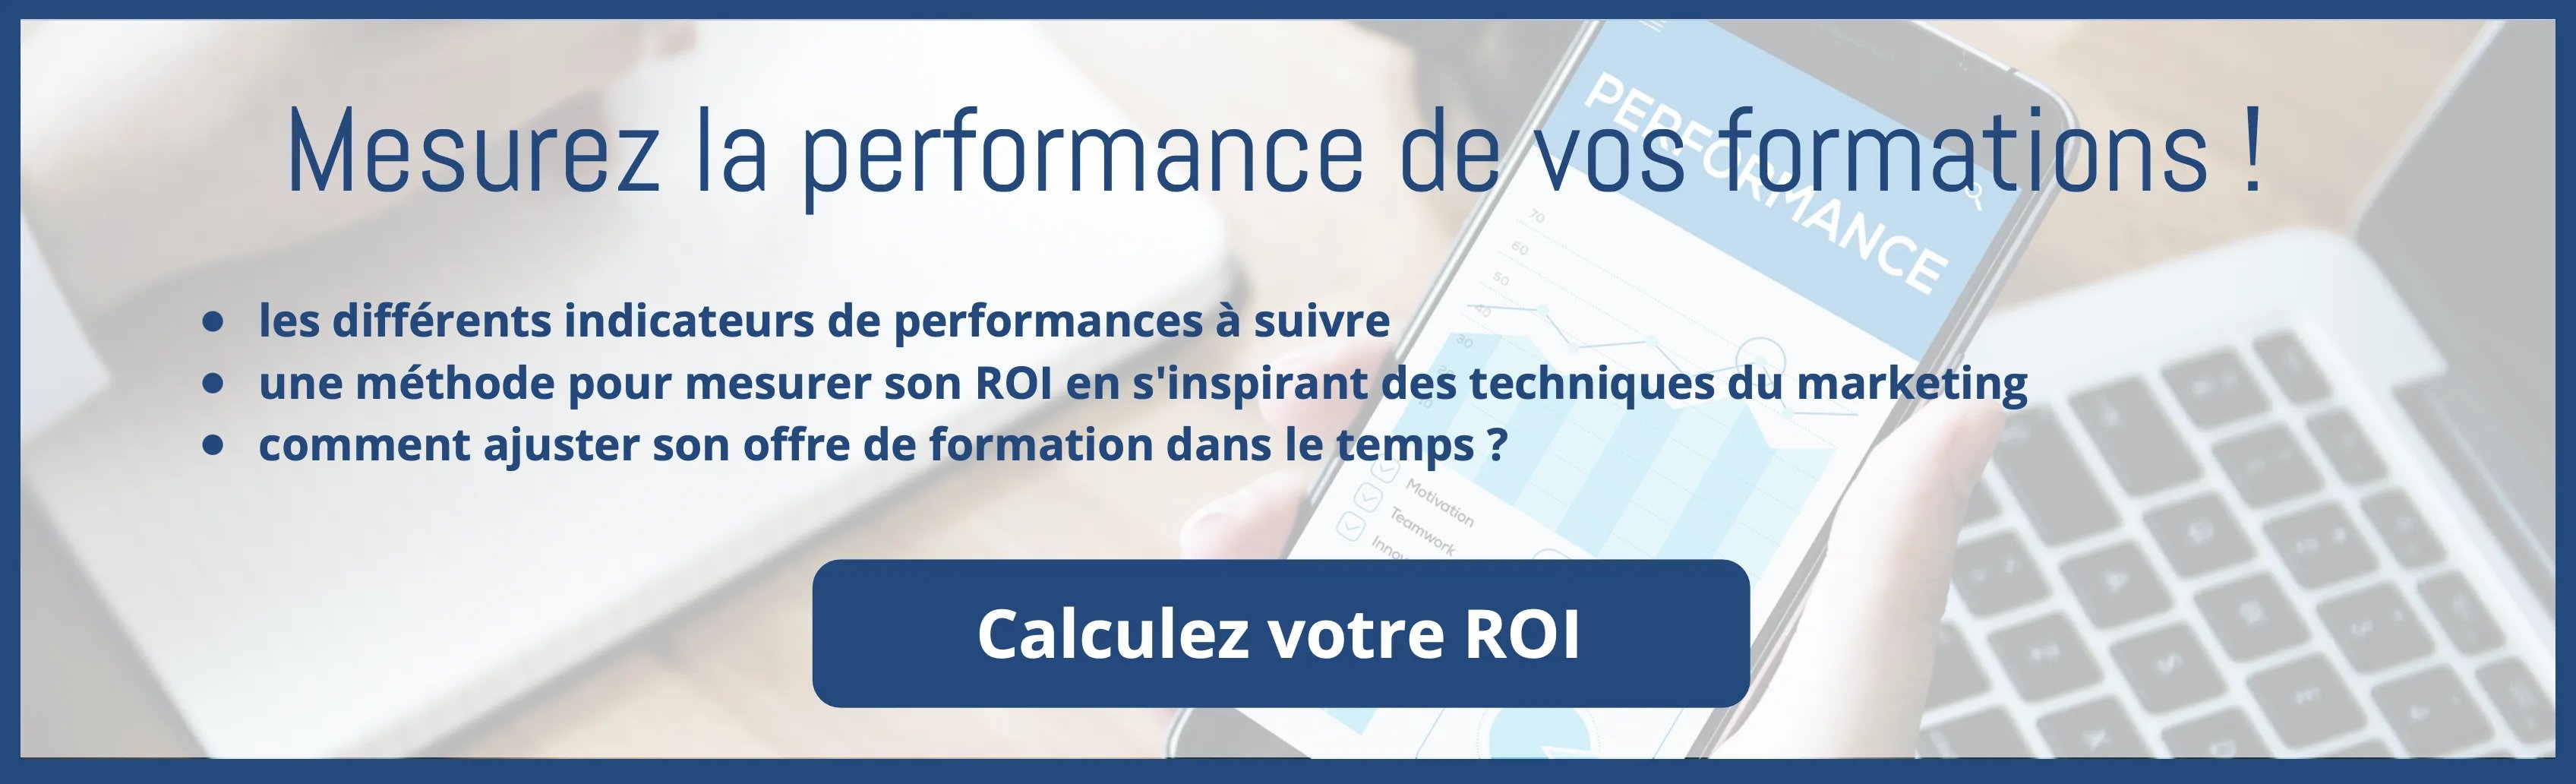 roi-formation-grand